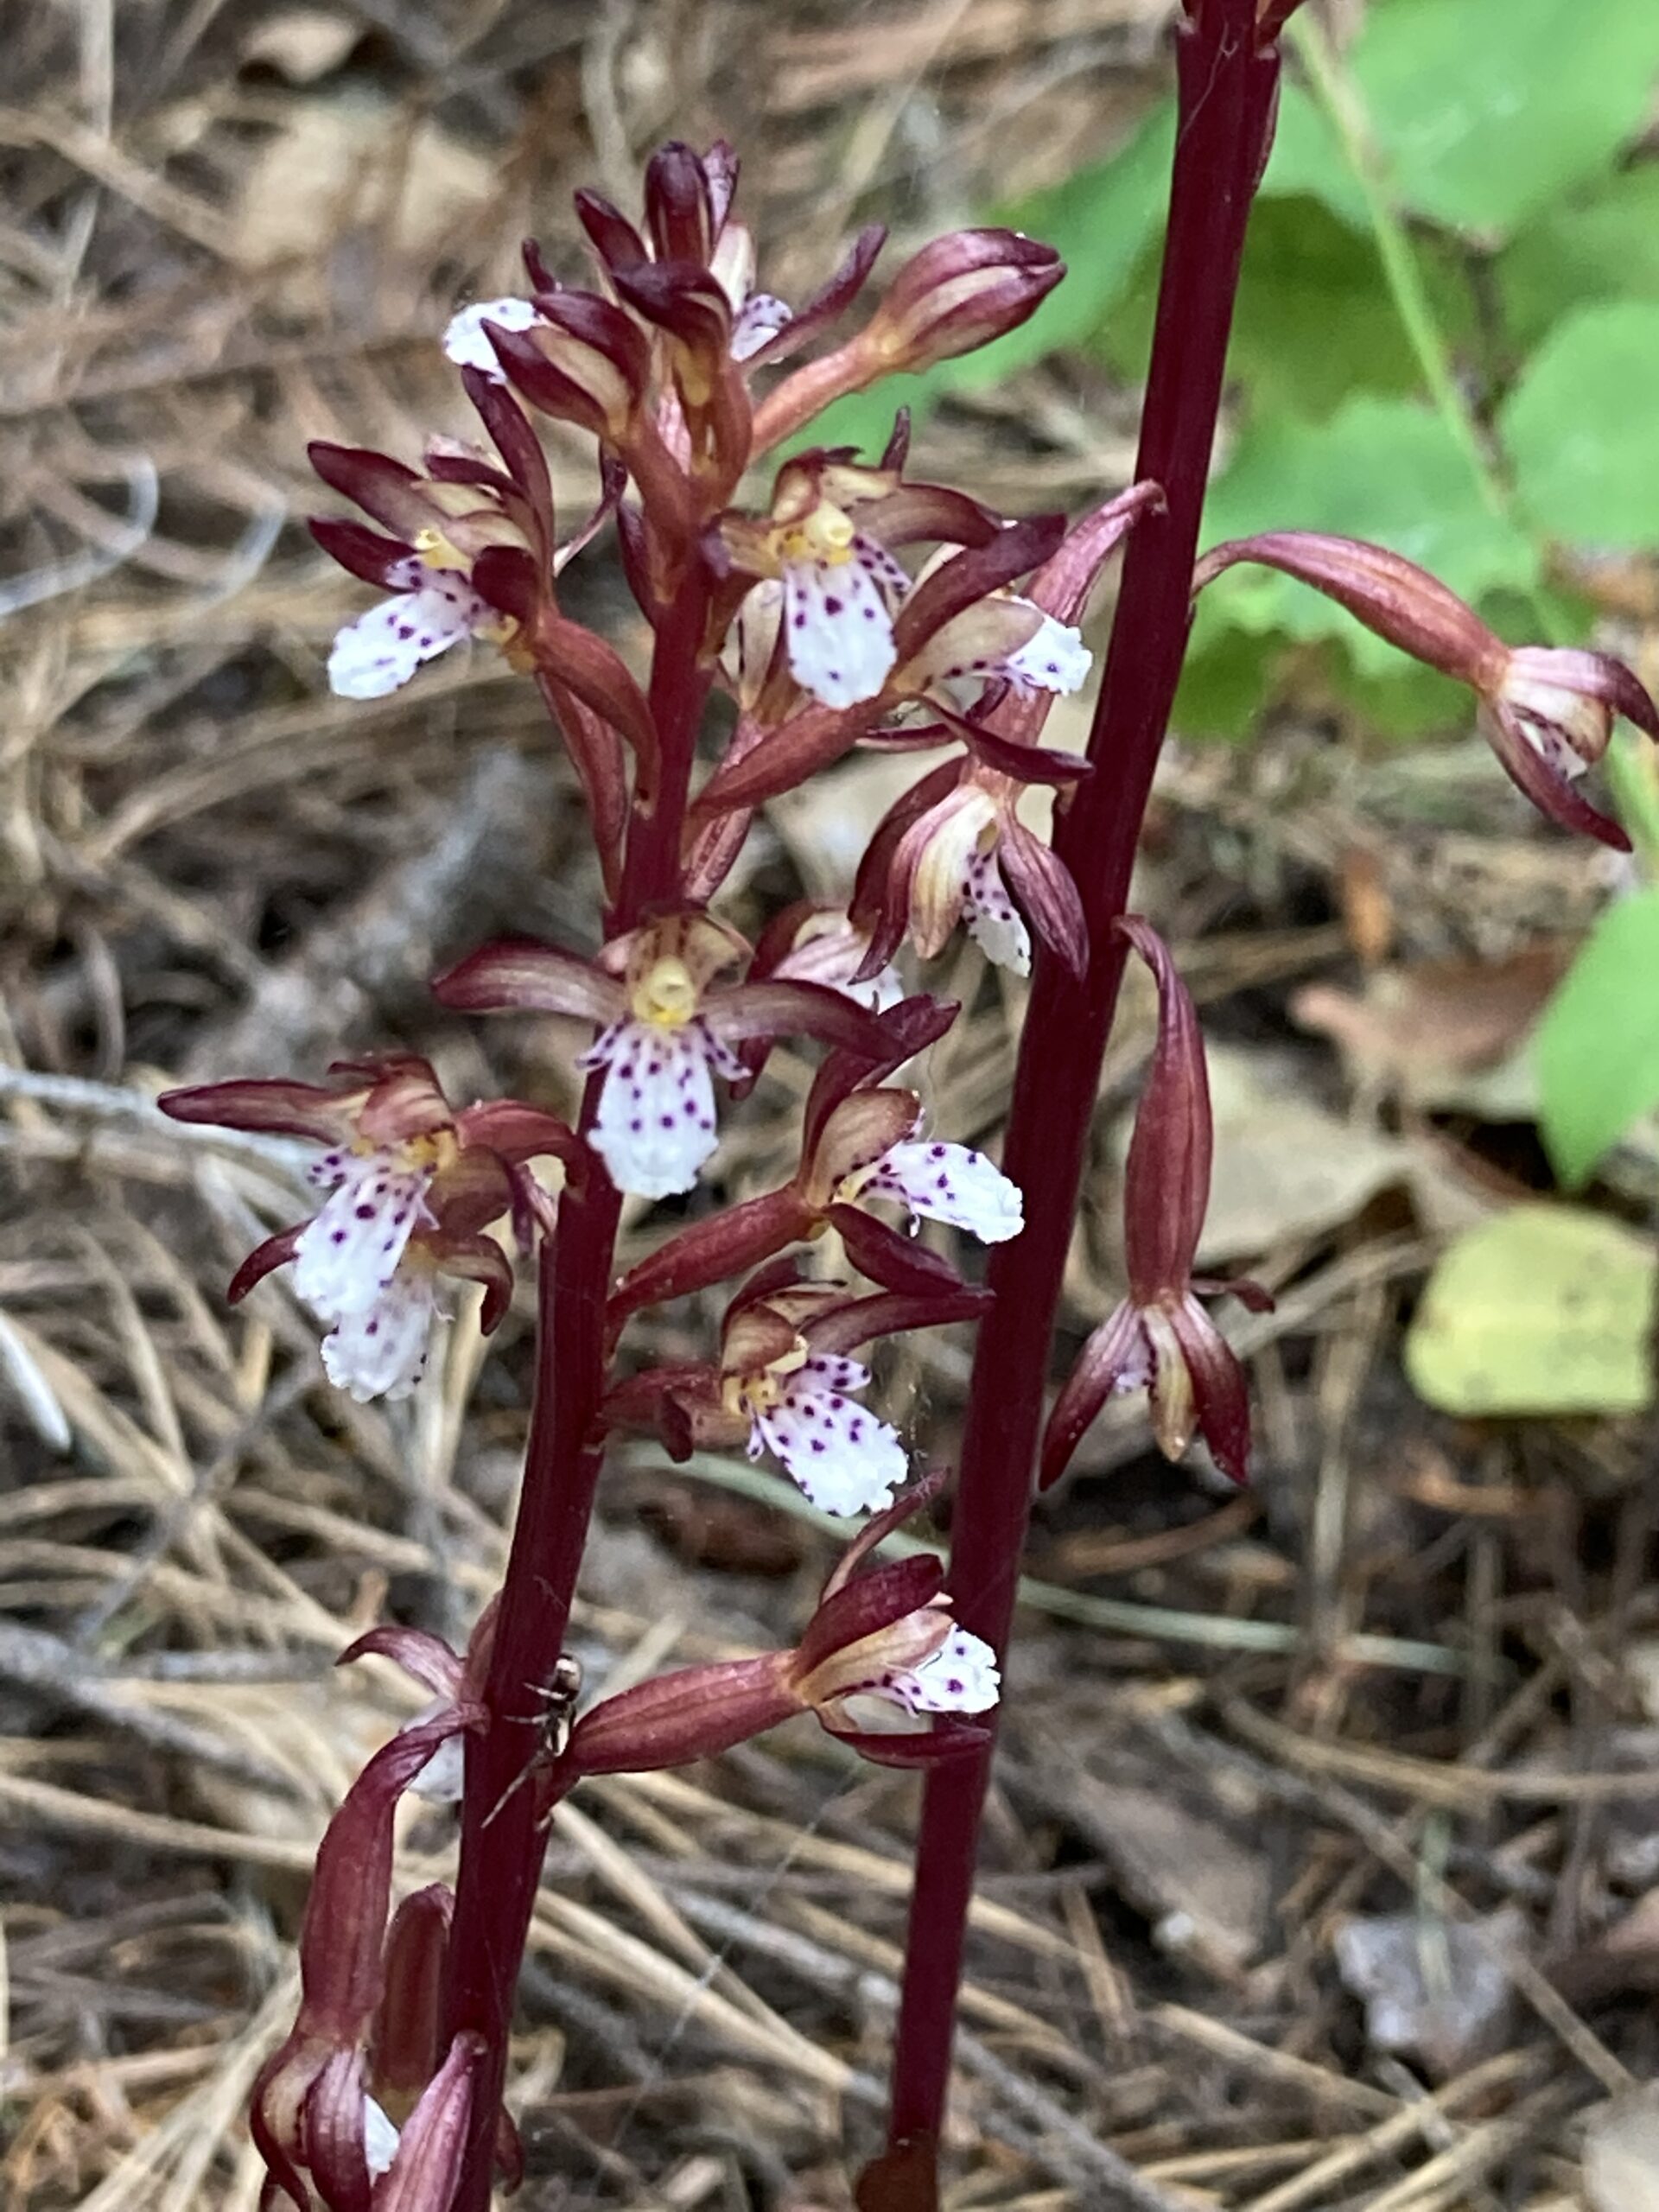 A close of coral root, with white flowers and a purple stem found in the Gate Creek Timber Sale.